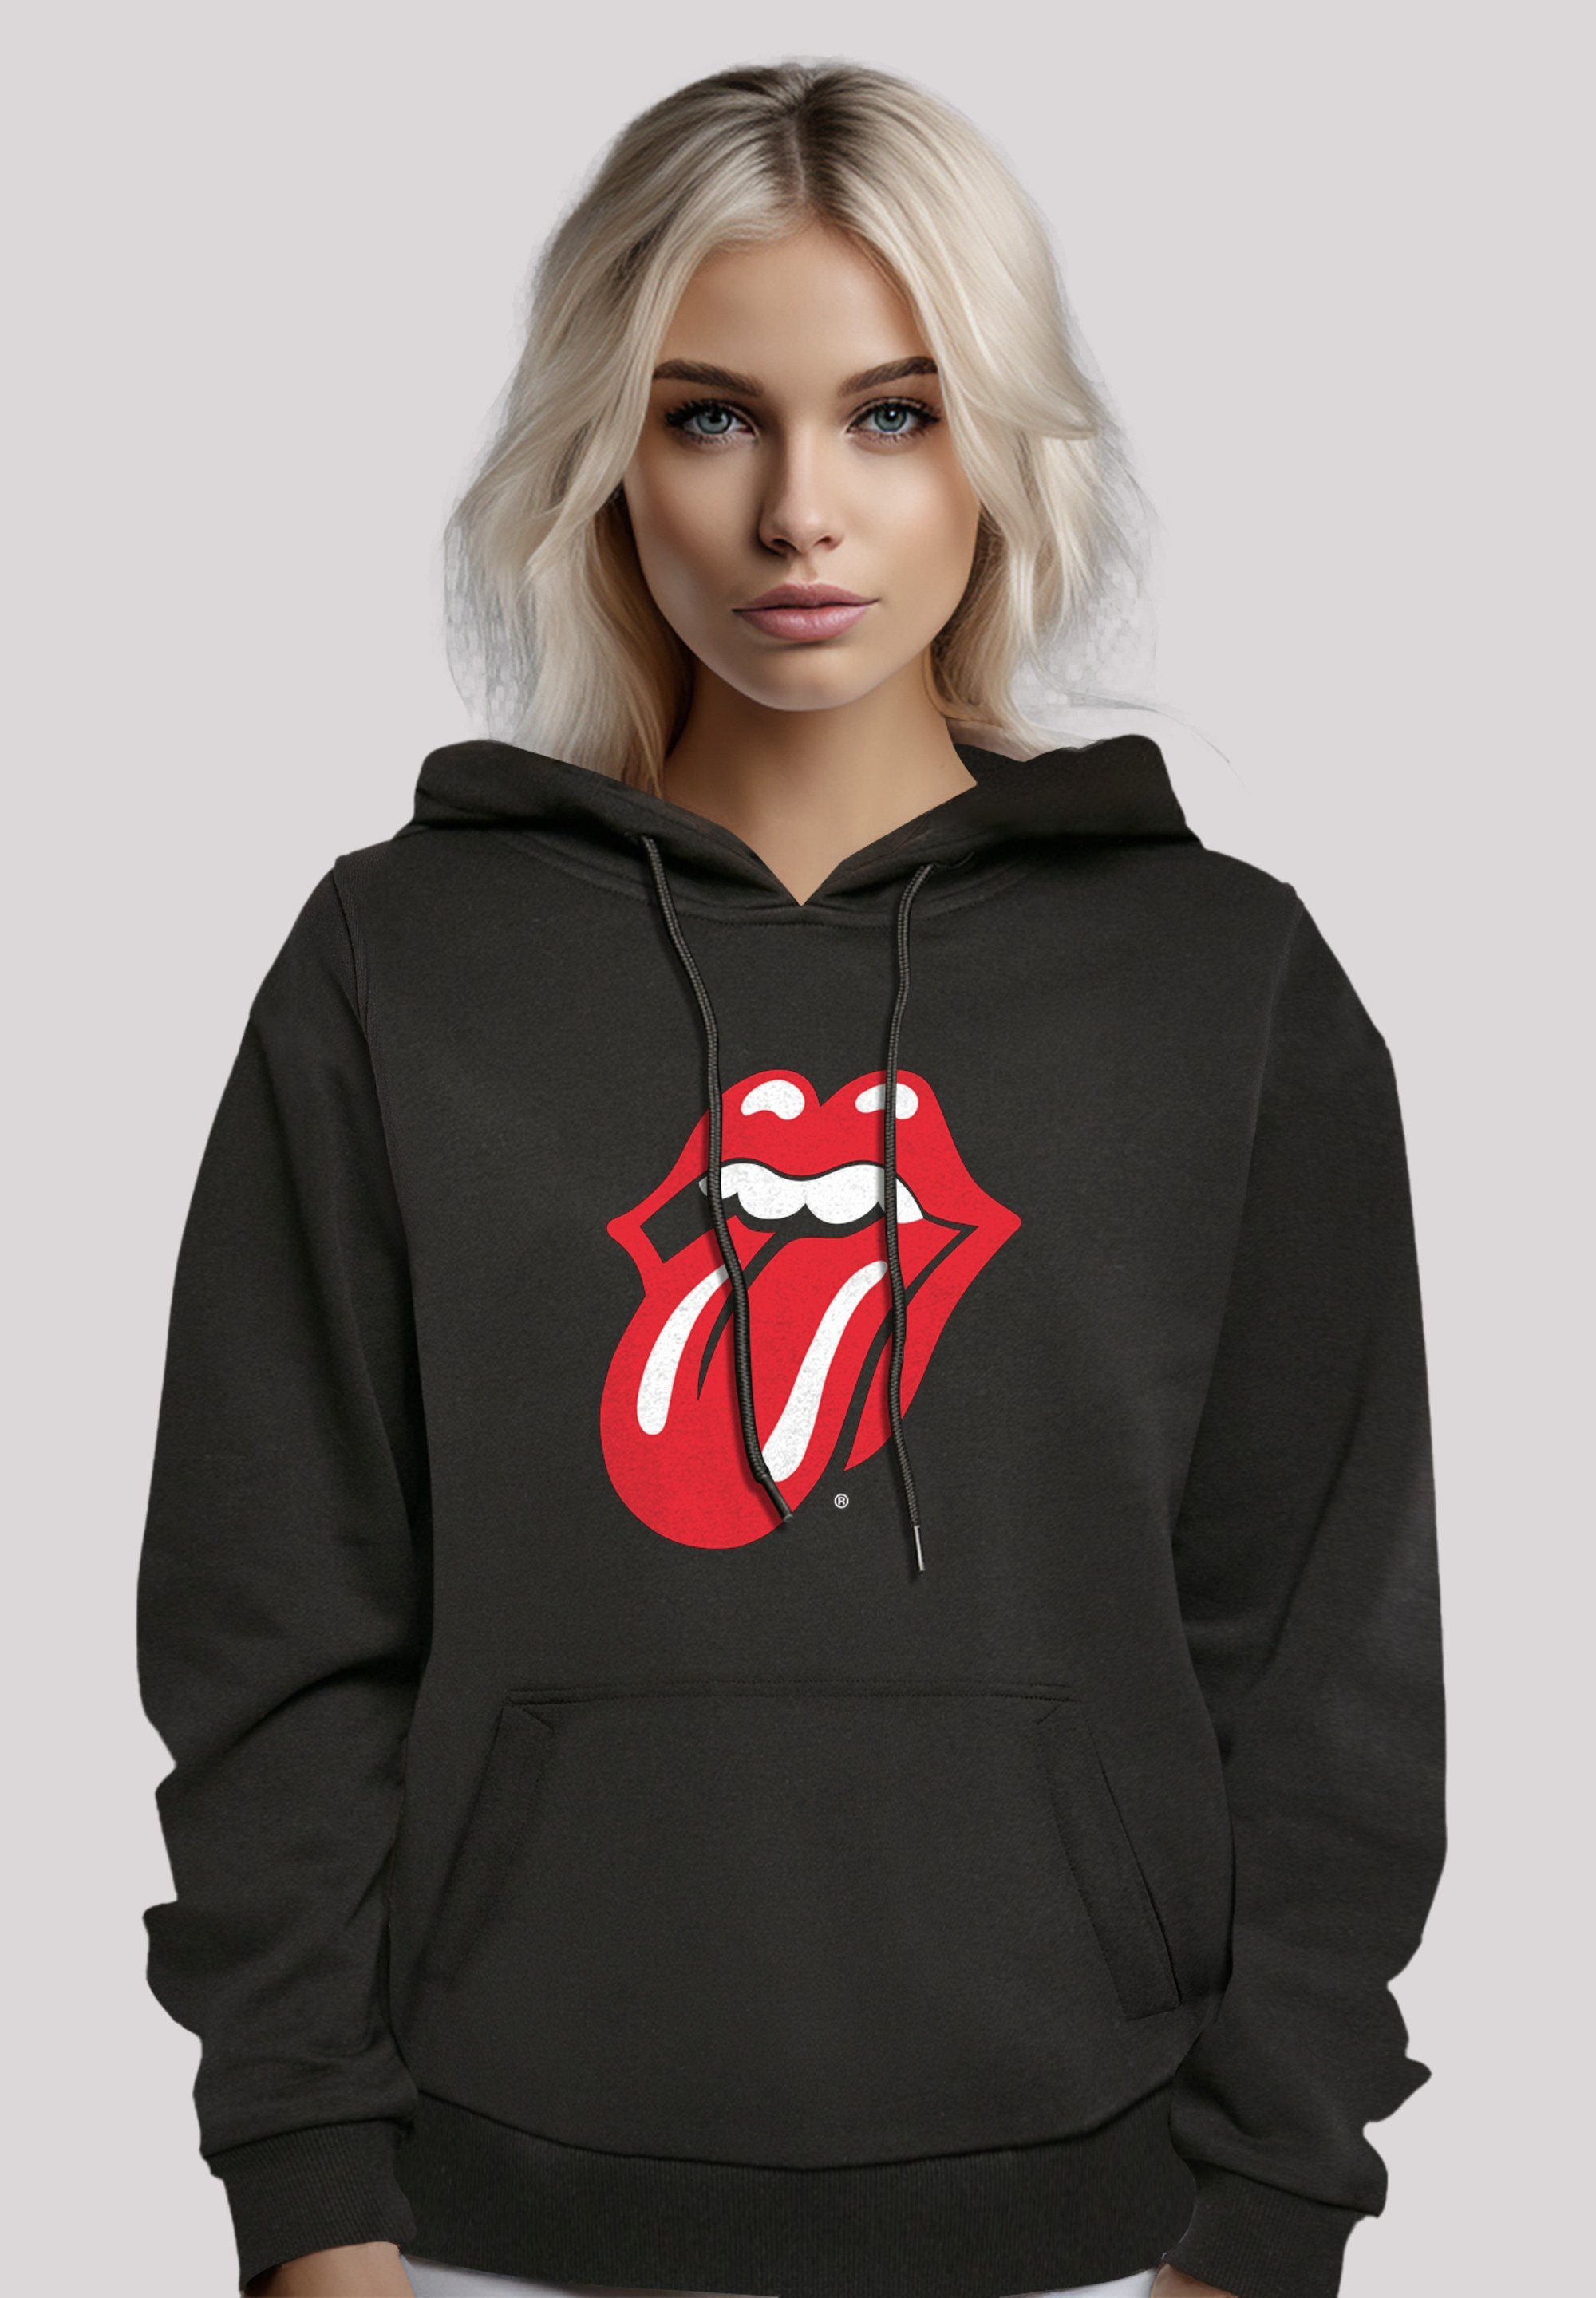 F4NT4STIC Kapuzenpullover The Rolling Stones Classic Zunge Rock Musik Band Hoodie, Warm, Bequem schwarz